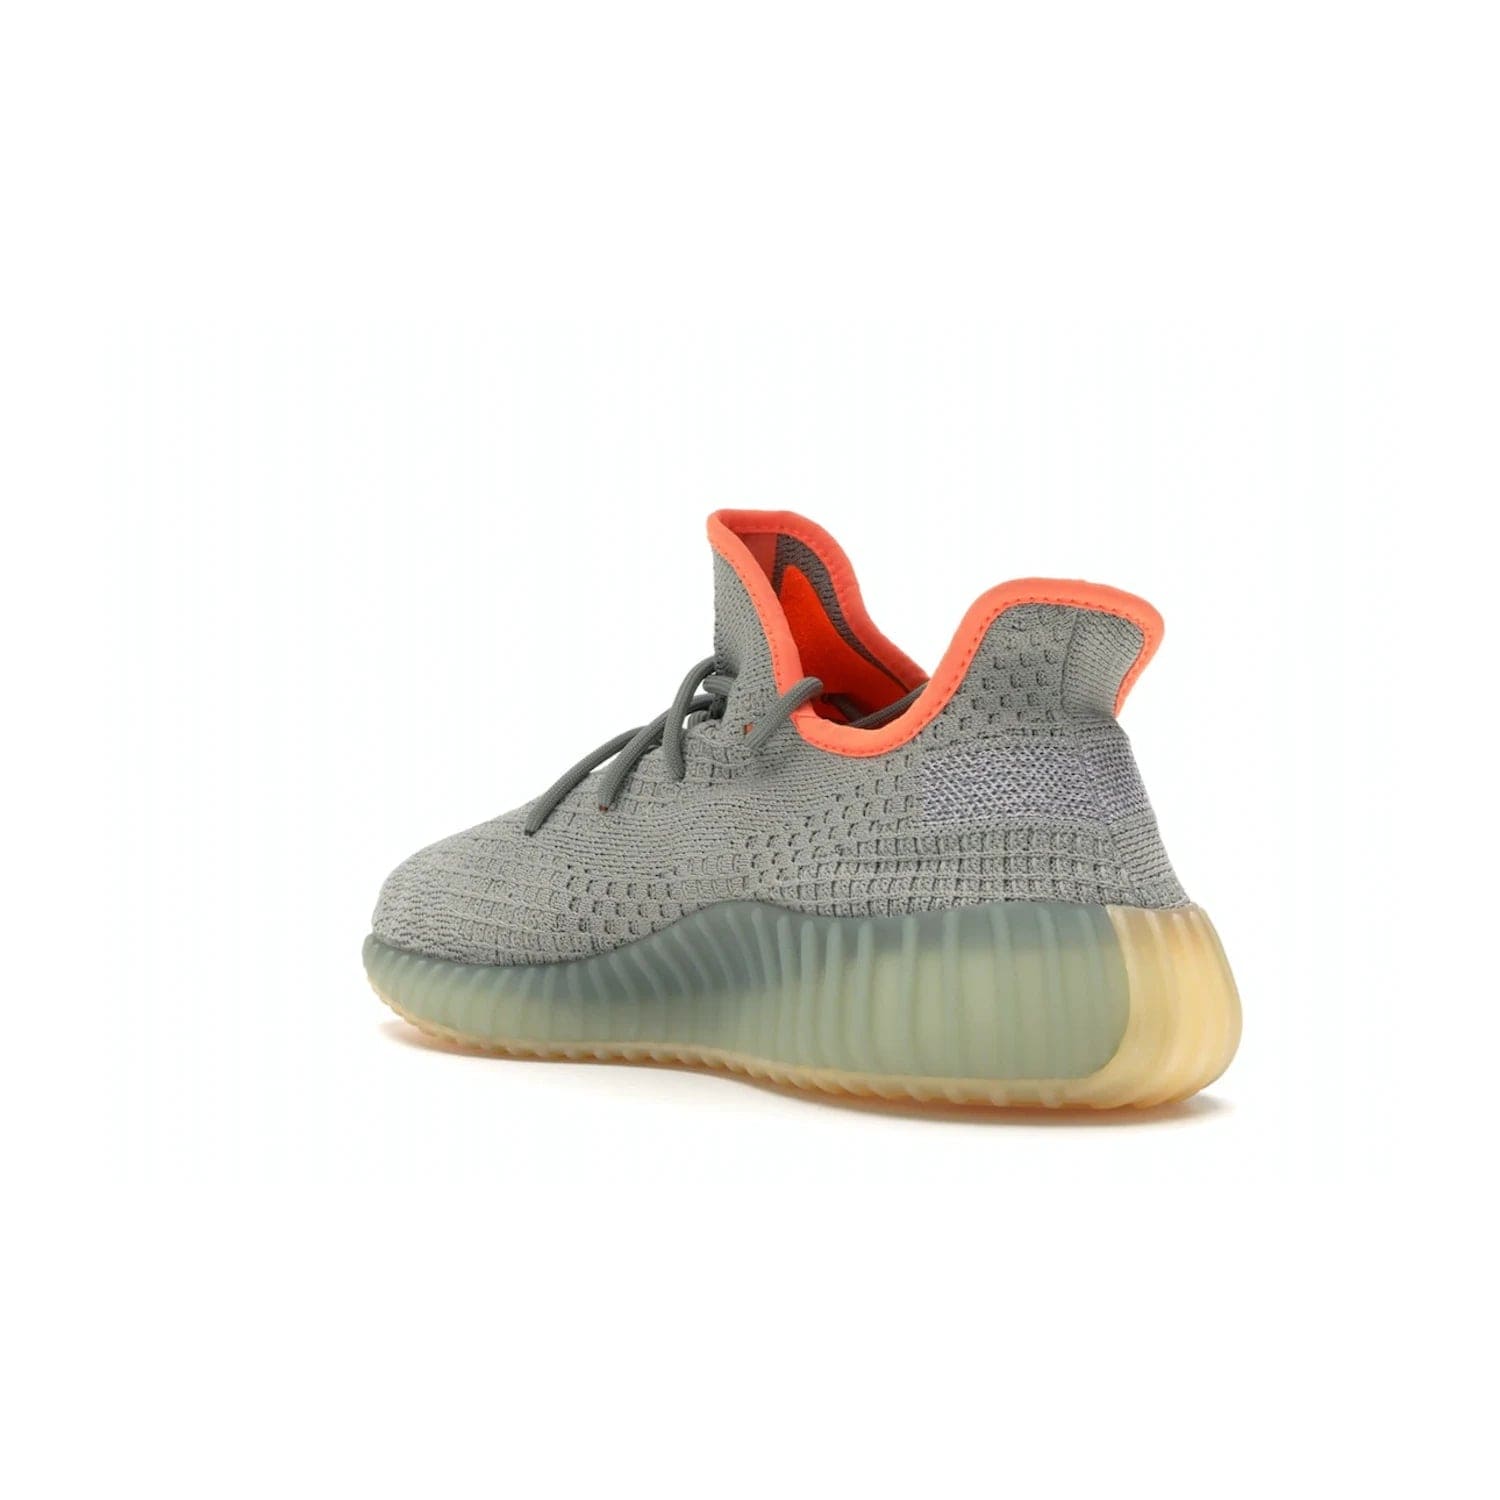 adidas Yeezy Boost 350 V2 Desert Sage - Image 24 - Only at www.BallersClubKickz.com - Upgrade your style with the adidas Yeezy Boost 350 V2 Desert Sage. This 350V2 features a Desert Sage primeknit upper with tonal side stripe, and an orange-highlighted translucent Boost cushioning sole. Stay on-trend in effortless style.